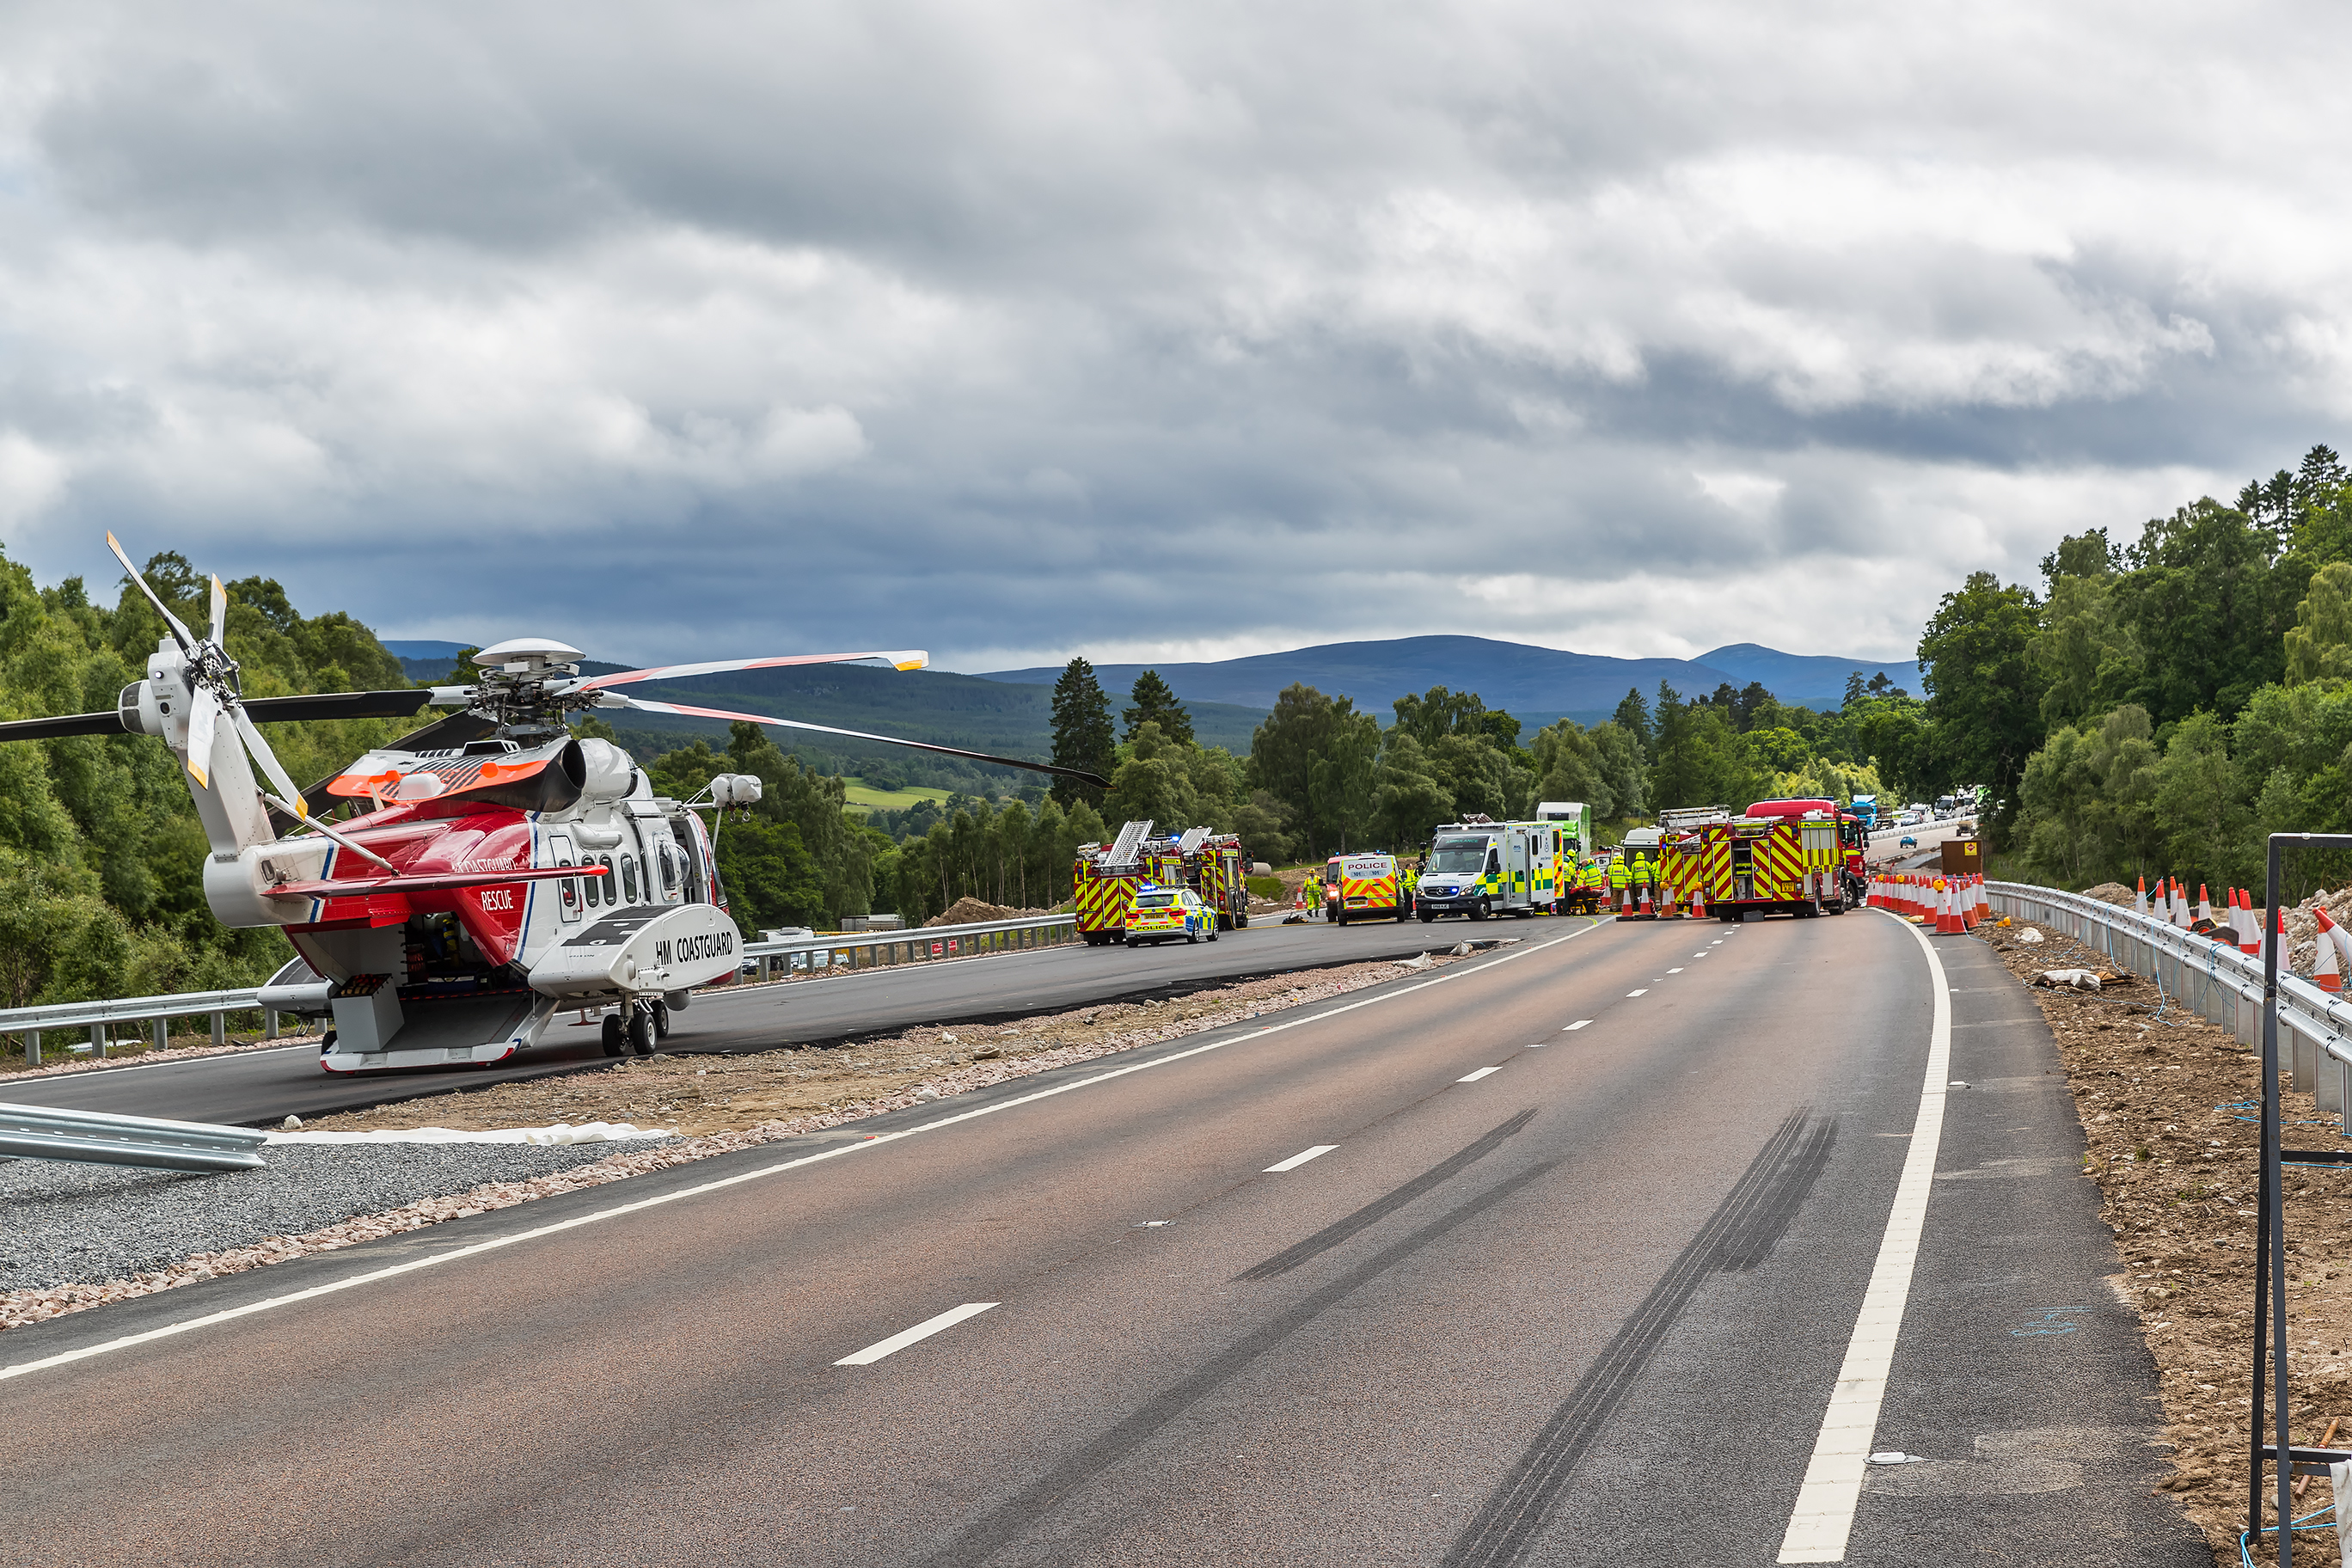 The scene of the accident on the A9 near Kincraig